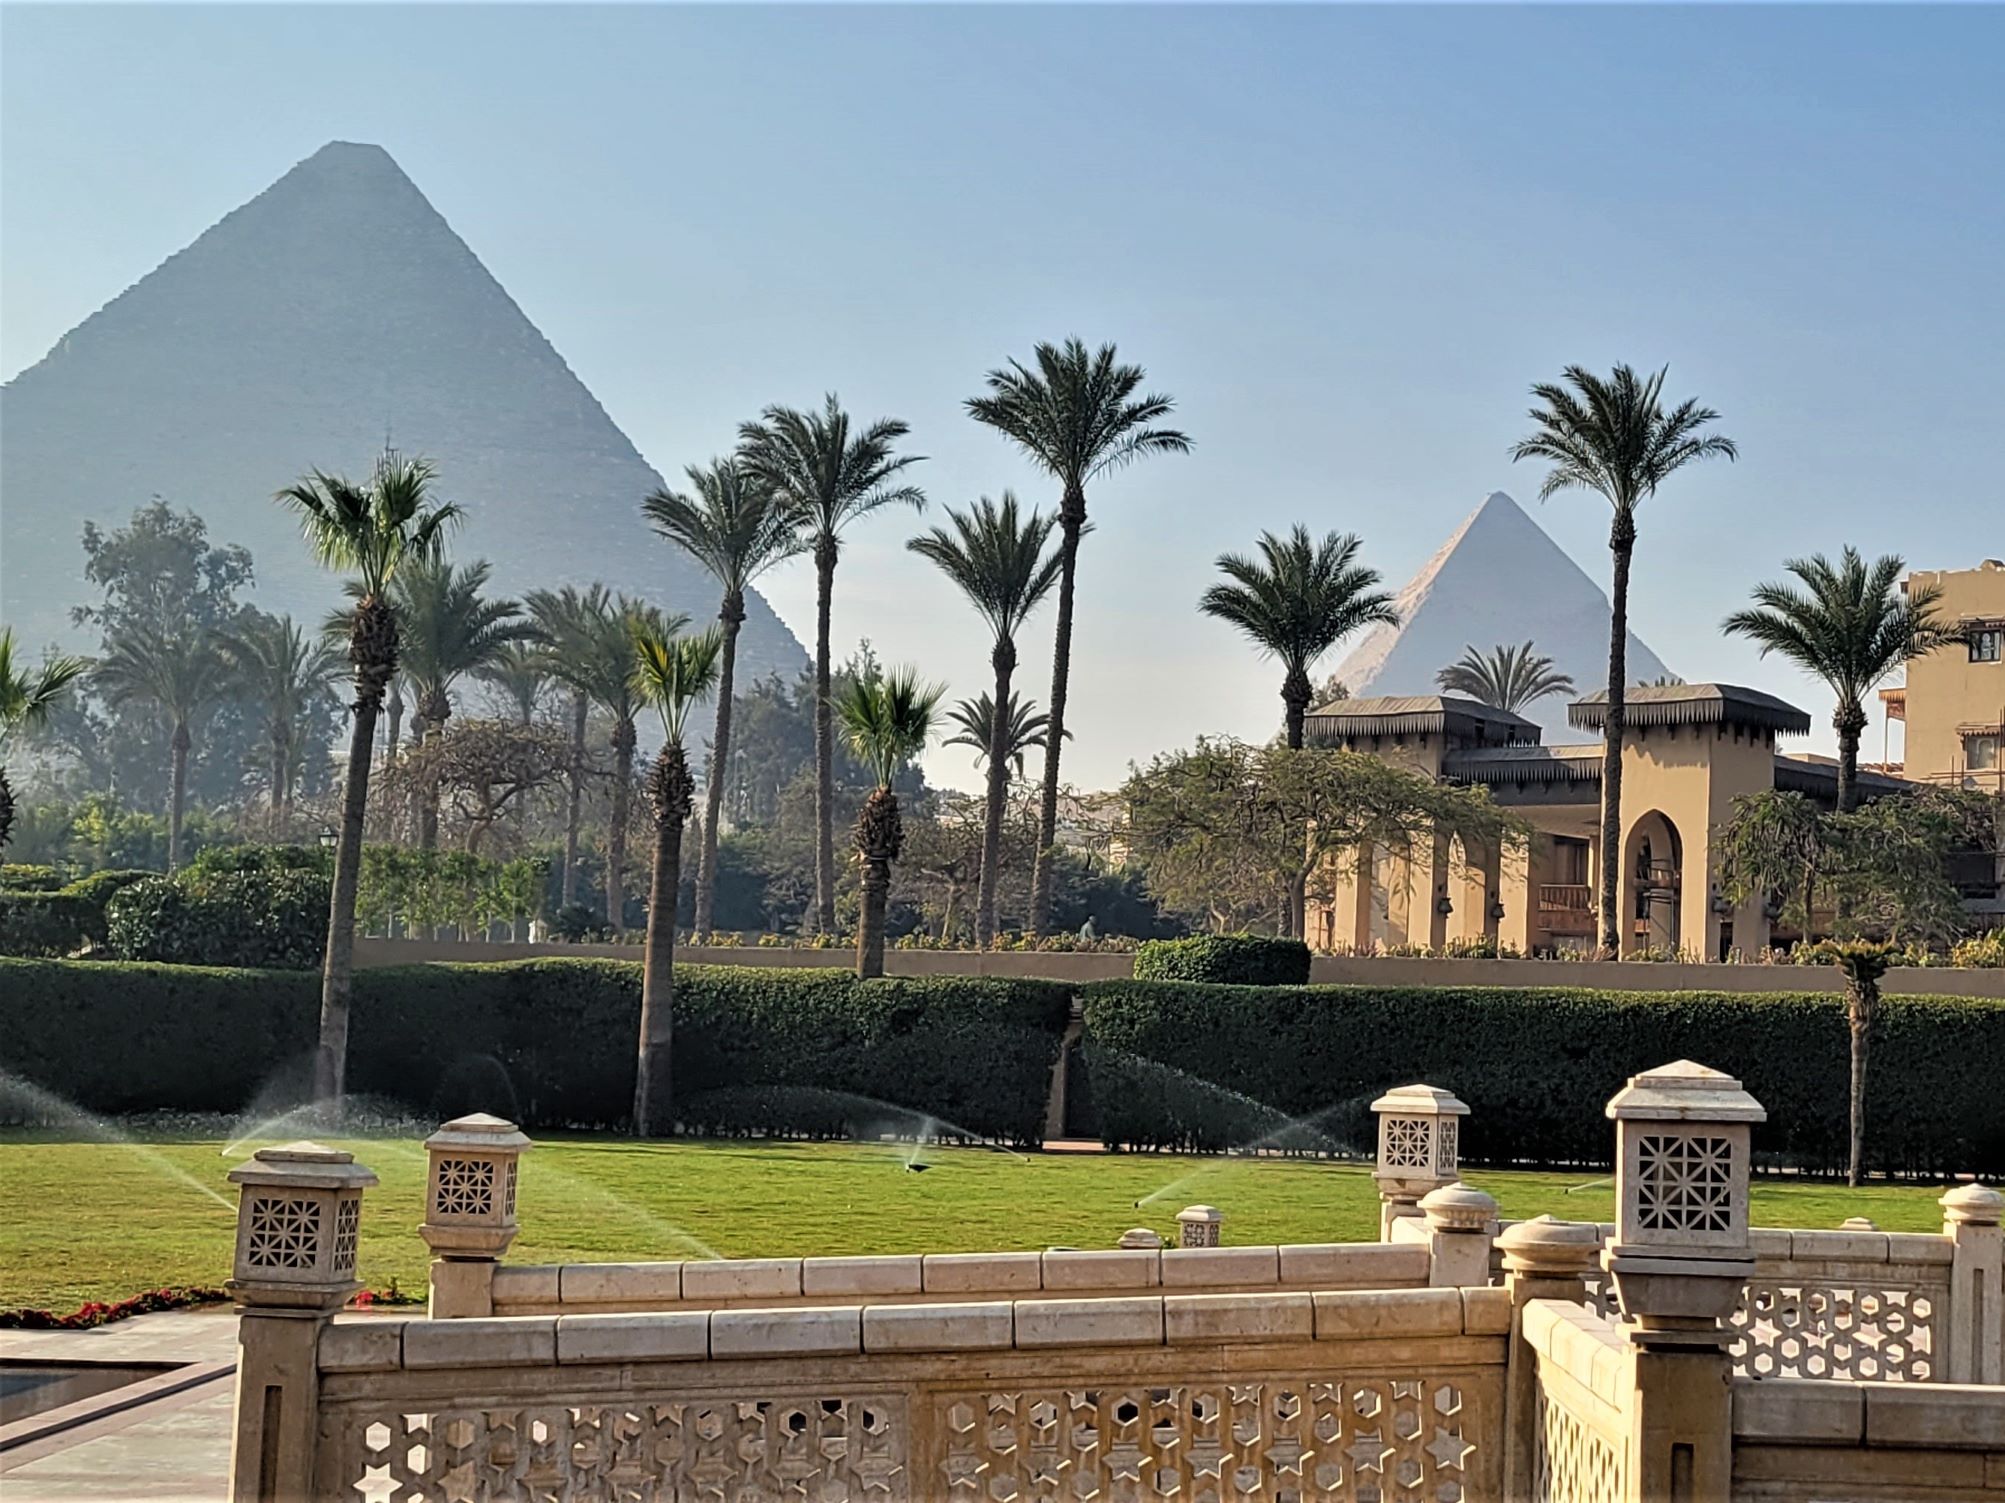 View of the Pyramids of Giza from the Mena House Hotel